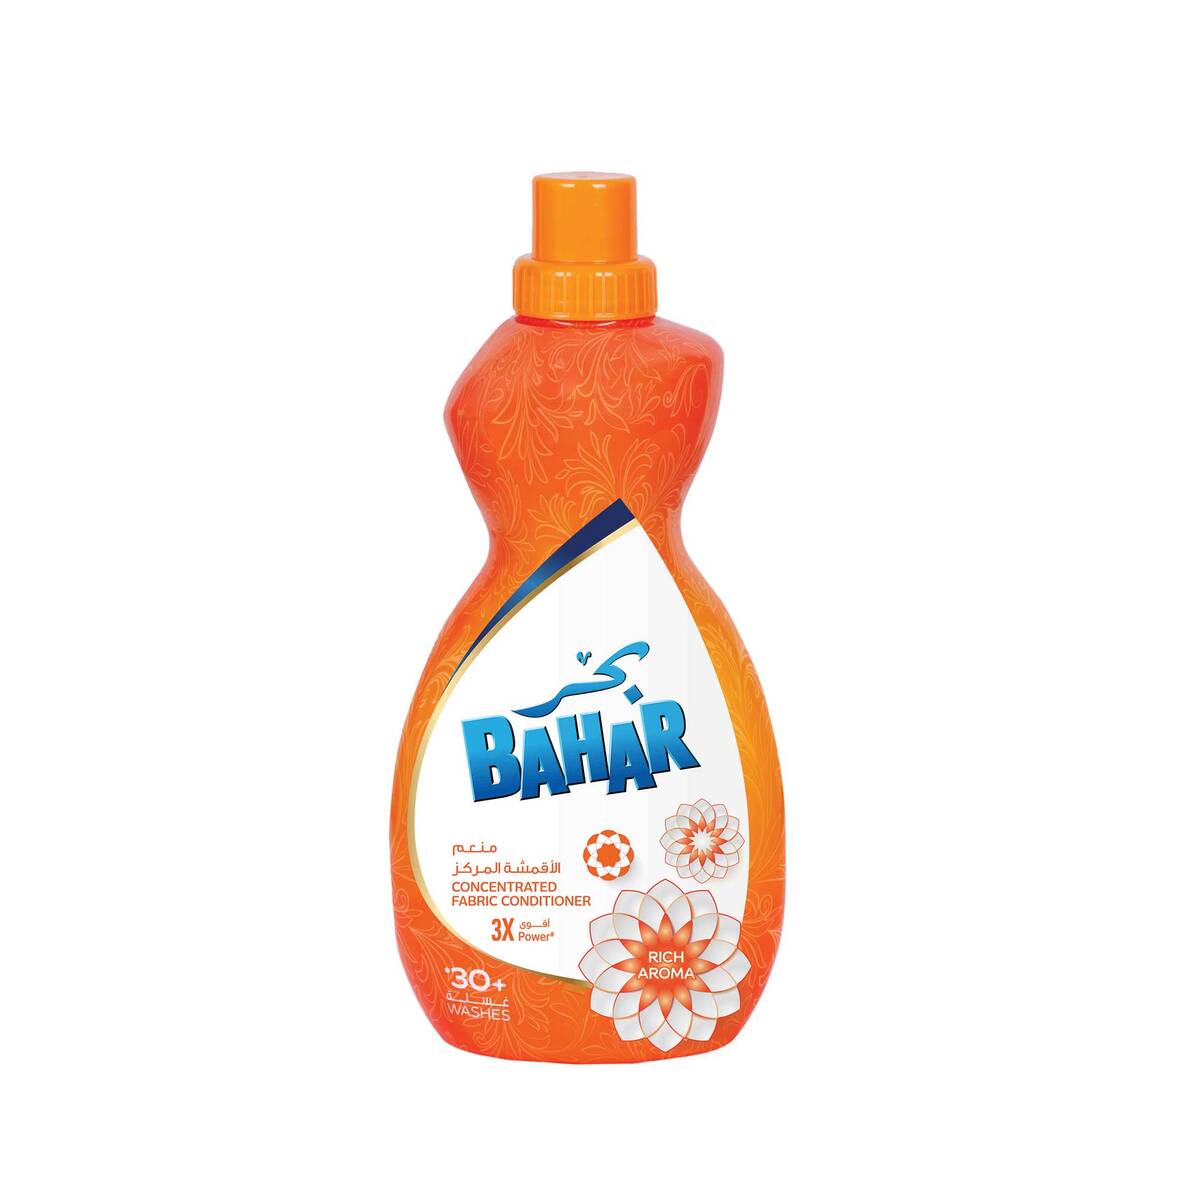 Bahar Rich Aroma Concentrated Fabric Conditioner 750 ml